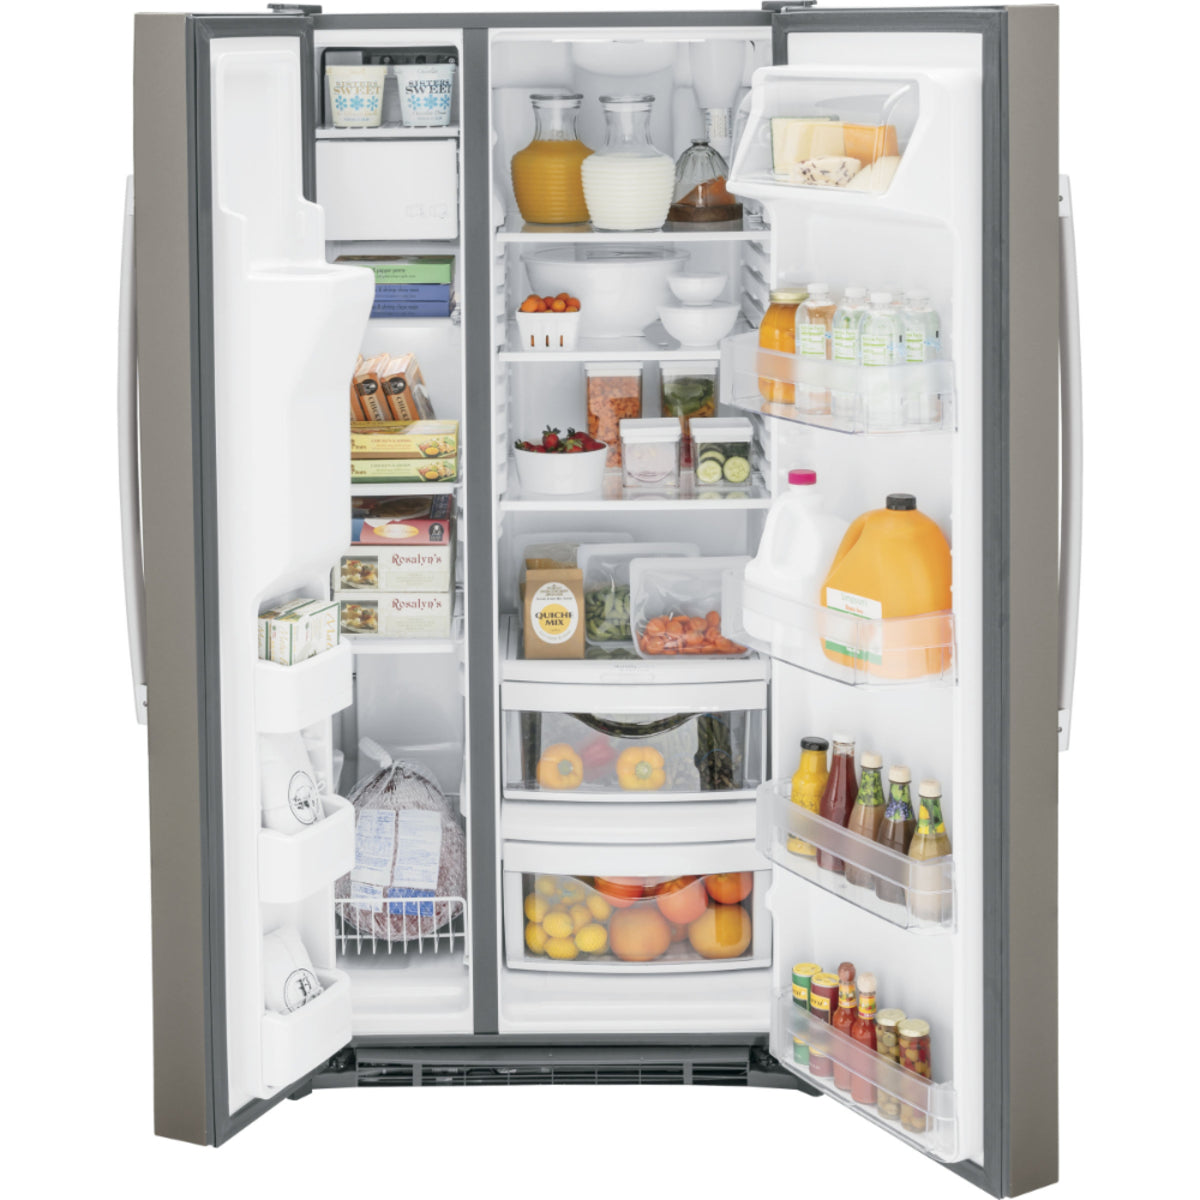 GE - 32.75 Inch 23 cu. ft Side by Side Refrigerator in Grey - GSS23GMPES